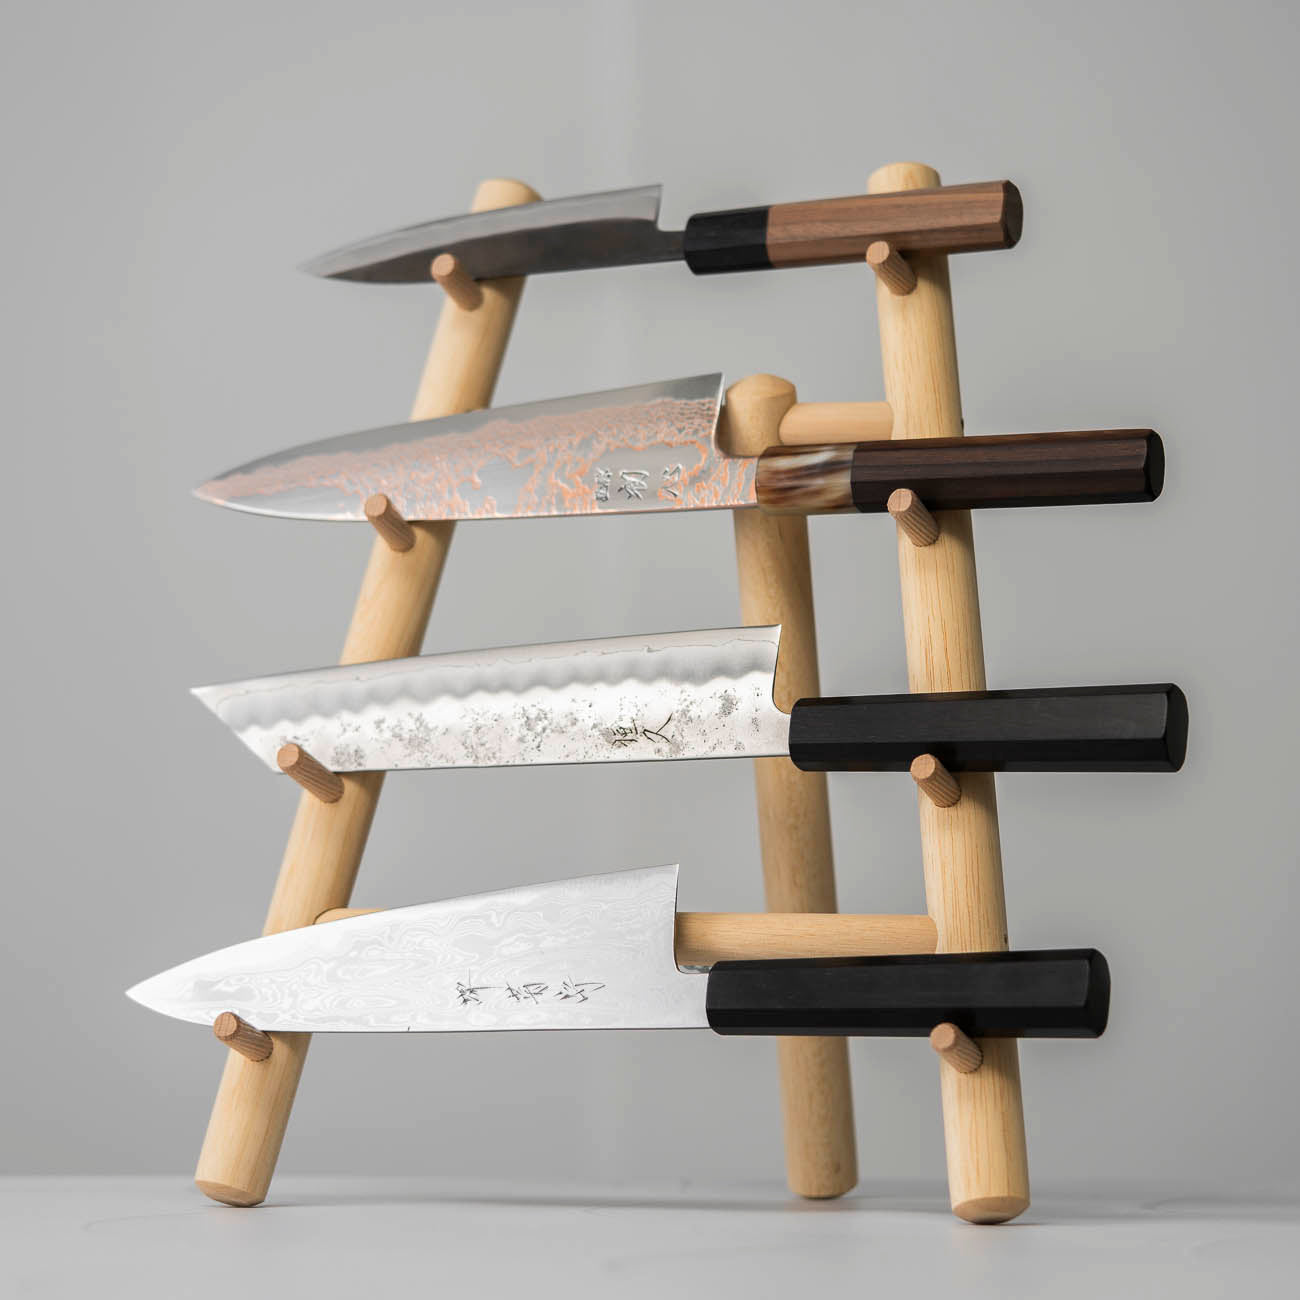 4 Piece Knife Tower